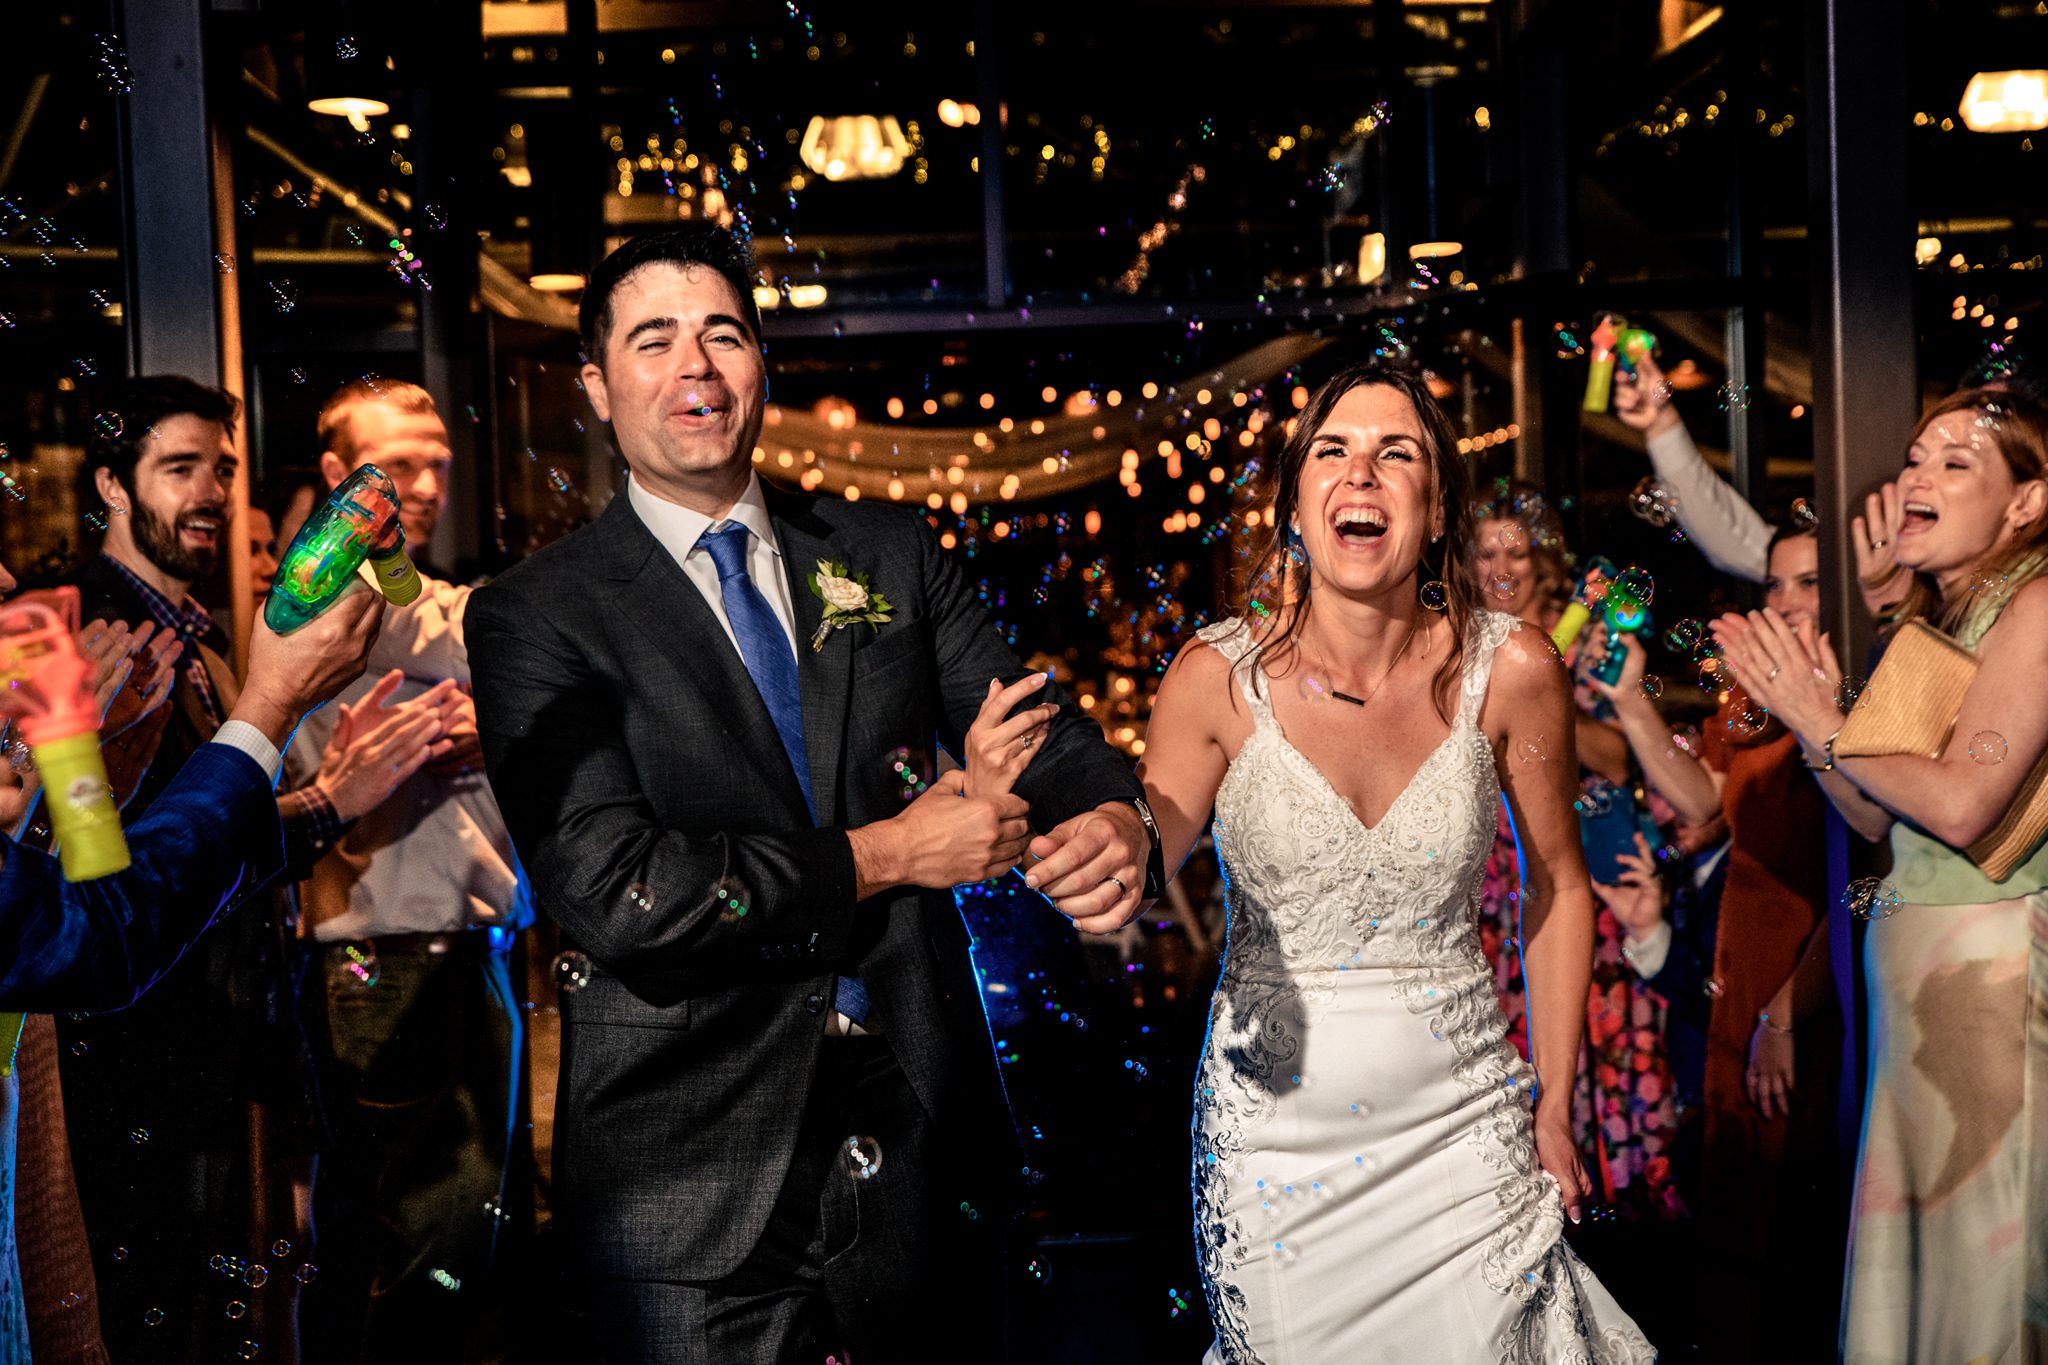 bride and groom exiting wedding reception while guests blow bubbles towards them